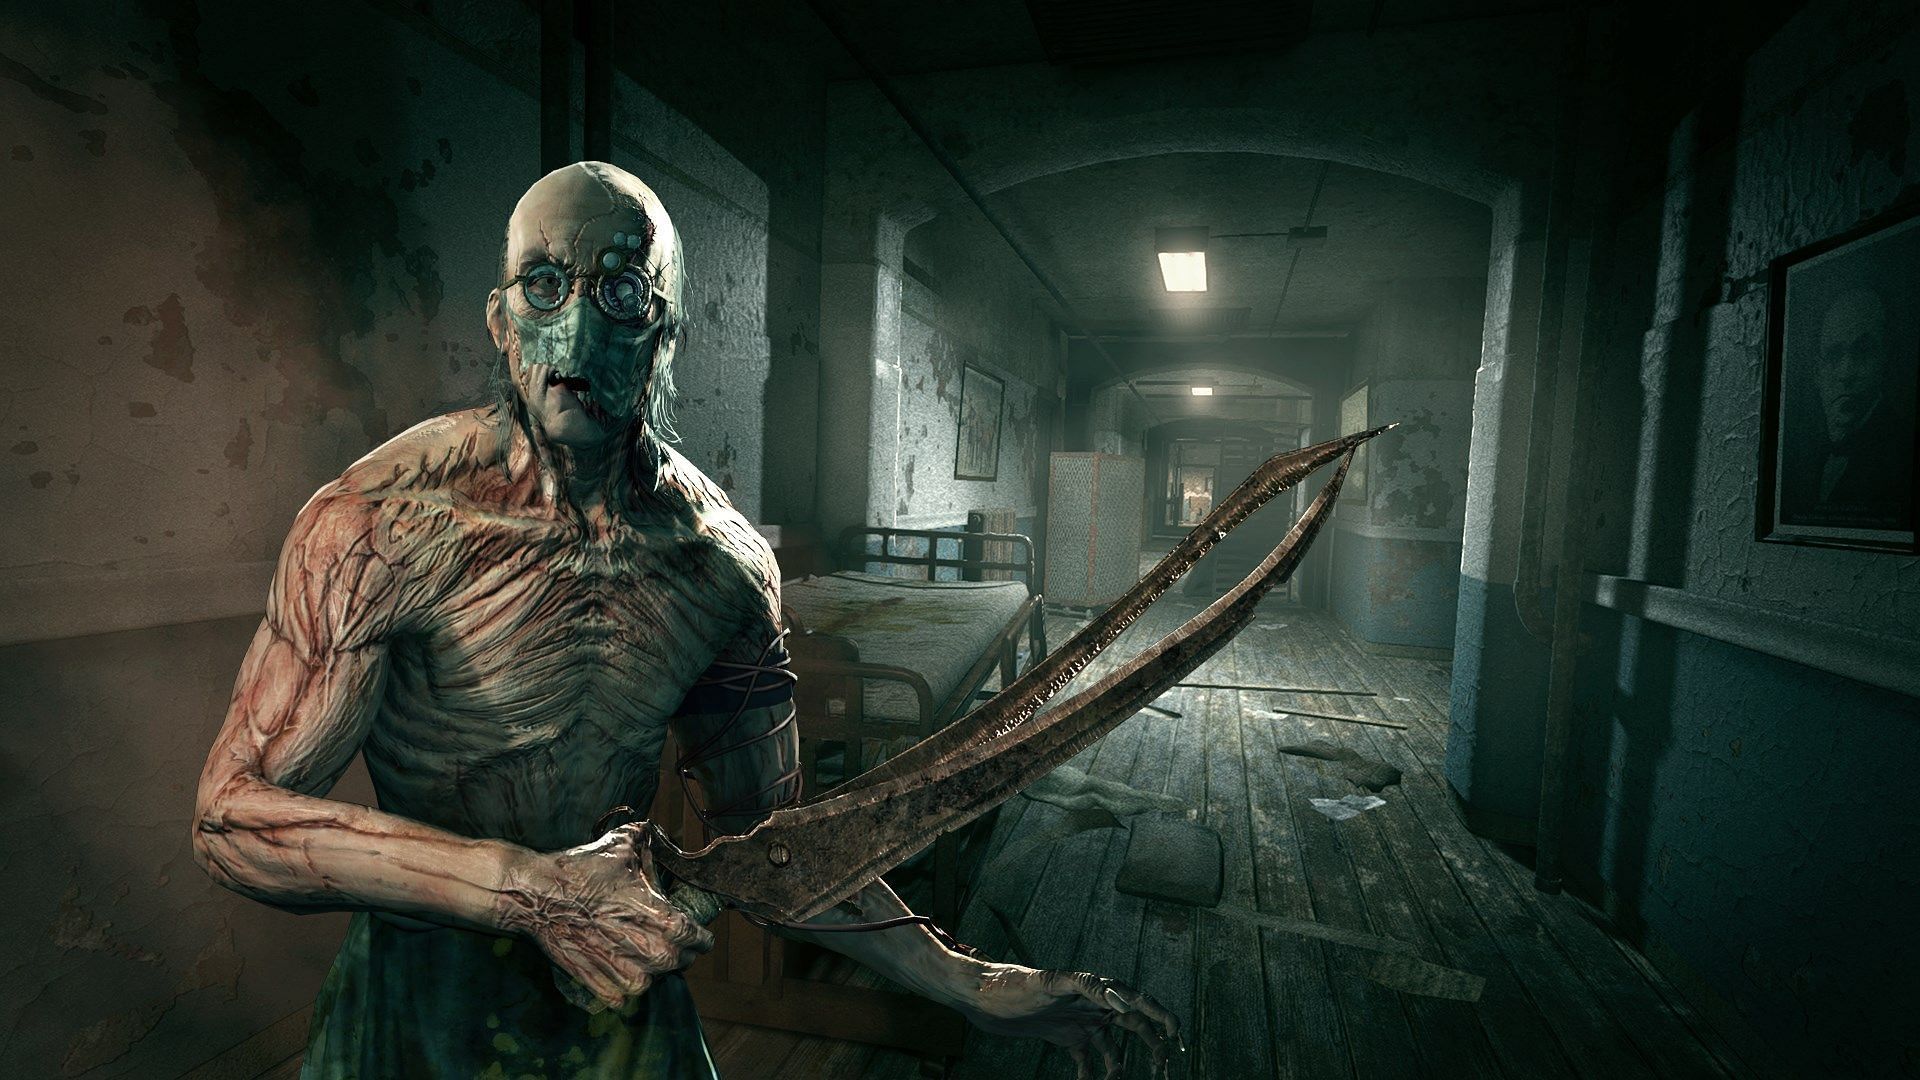 The scariest character in Outlast (Image via Microsoft)